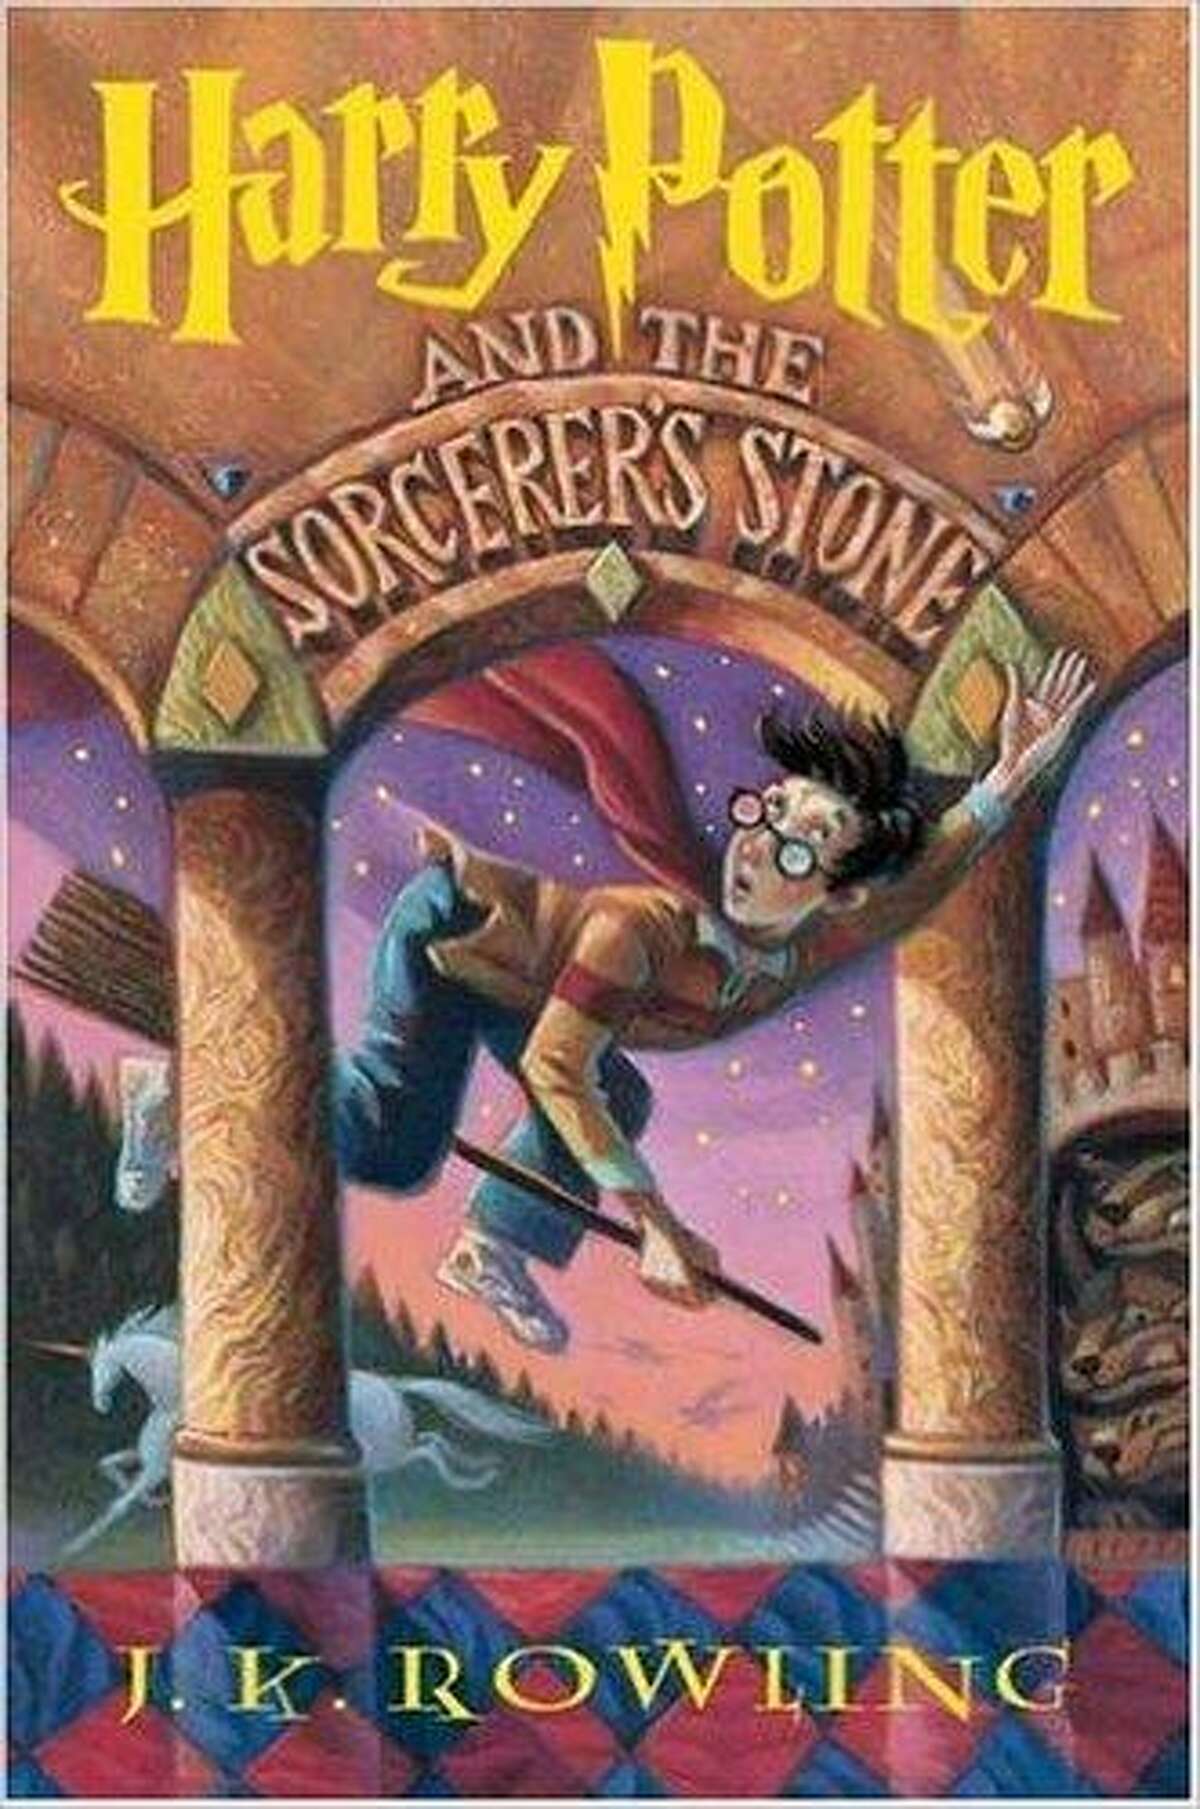 The British novel 'Harry Potter and the Philosopher's Stone' was changed to "Sorcerer's Stone' for the U.S. edition.